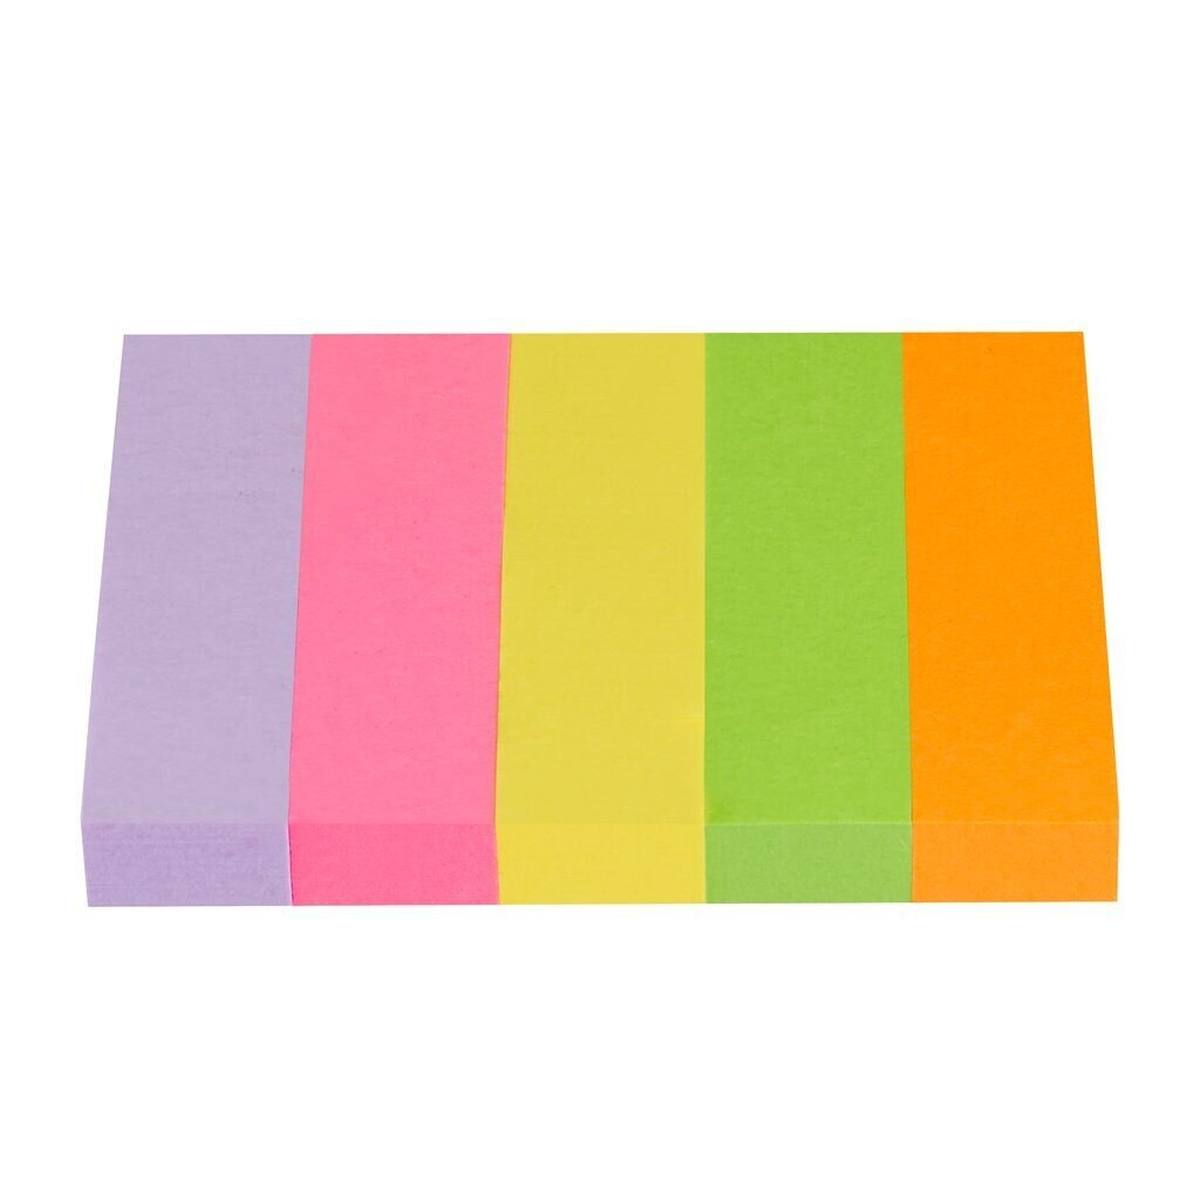 3M Post-it Page marker 670-5, 15 mm x 50 mm, neon yellow, neon green, neon orange, neon pink, violet, 5 x 100 sheets